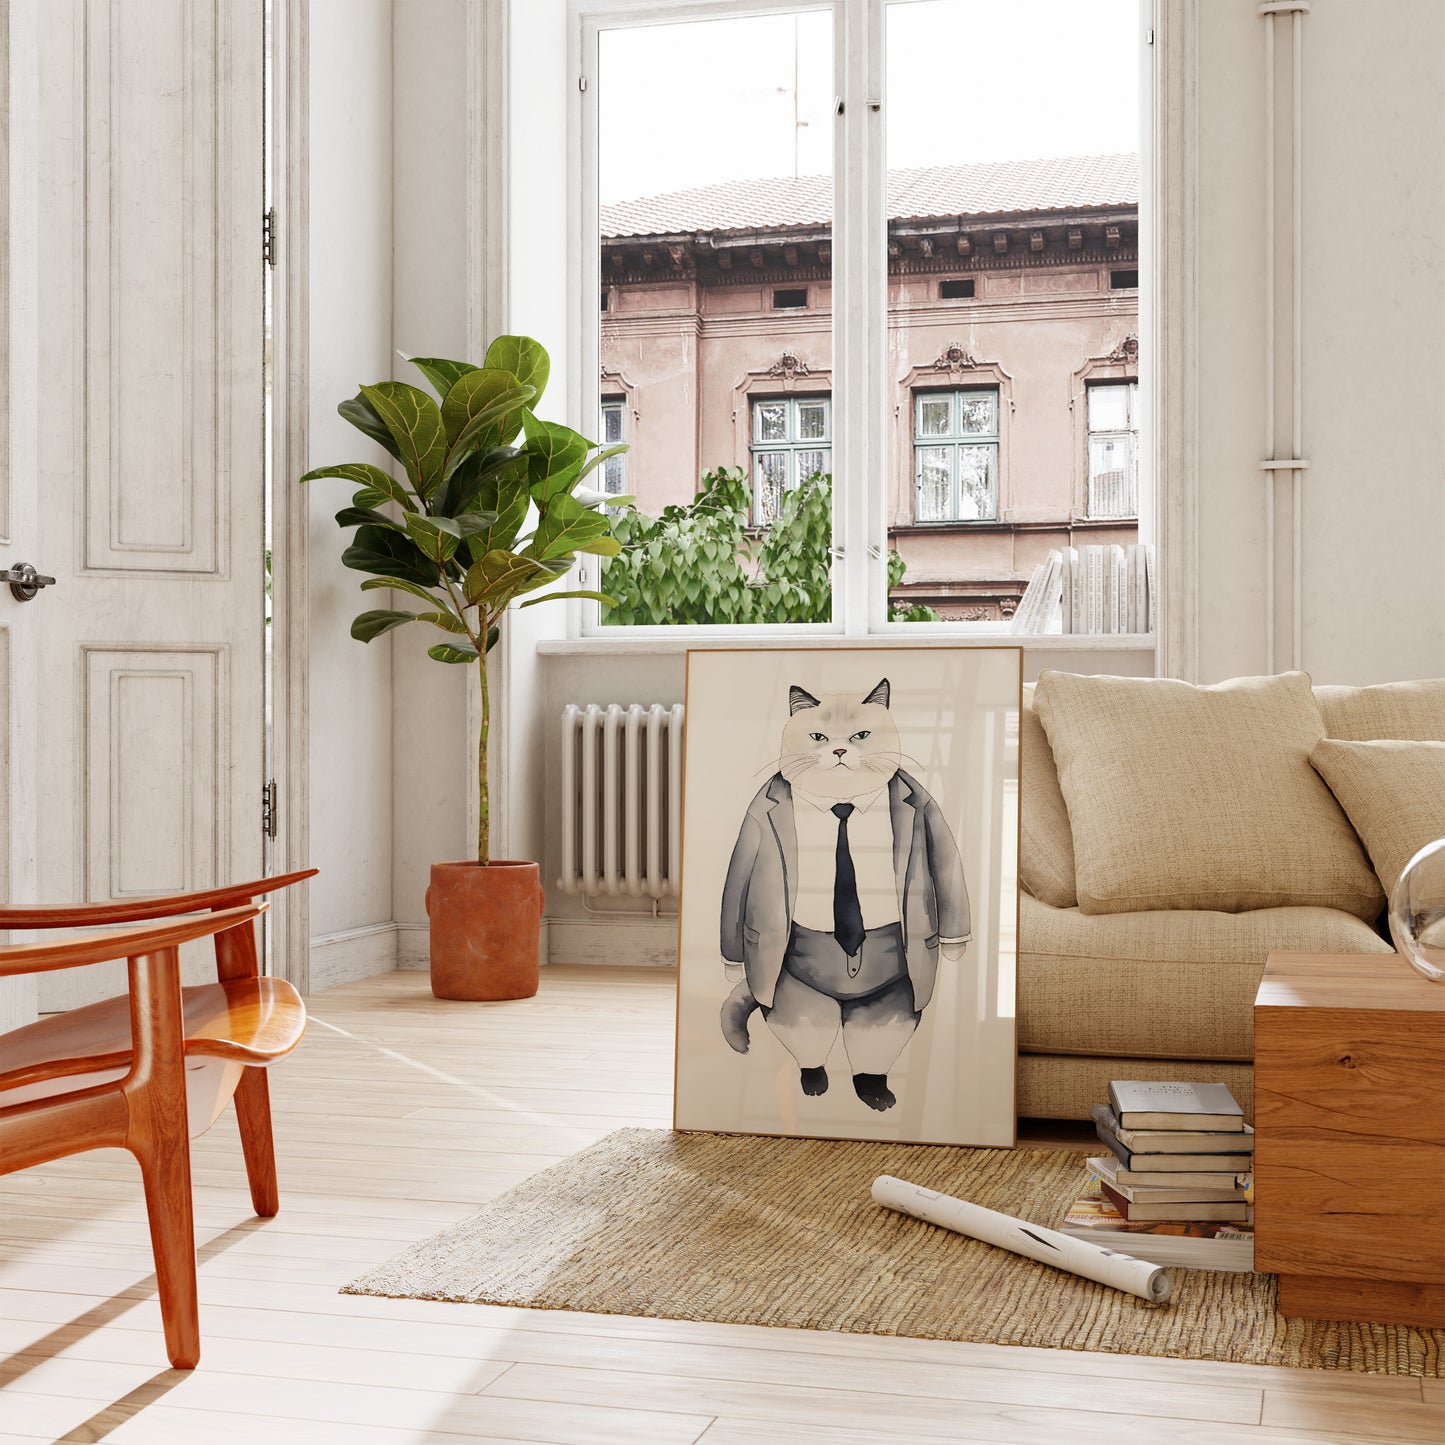 Art illustration of a cat in a suit leaning against the wall in a stylish interior.